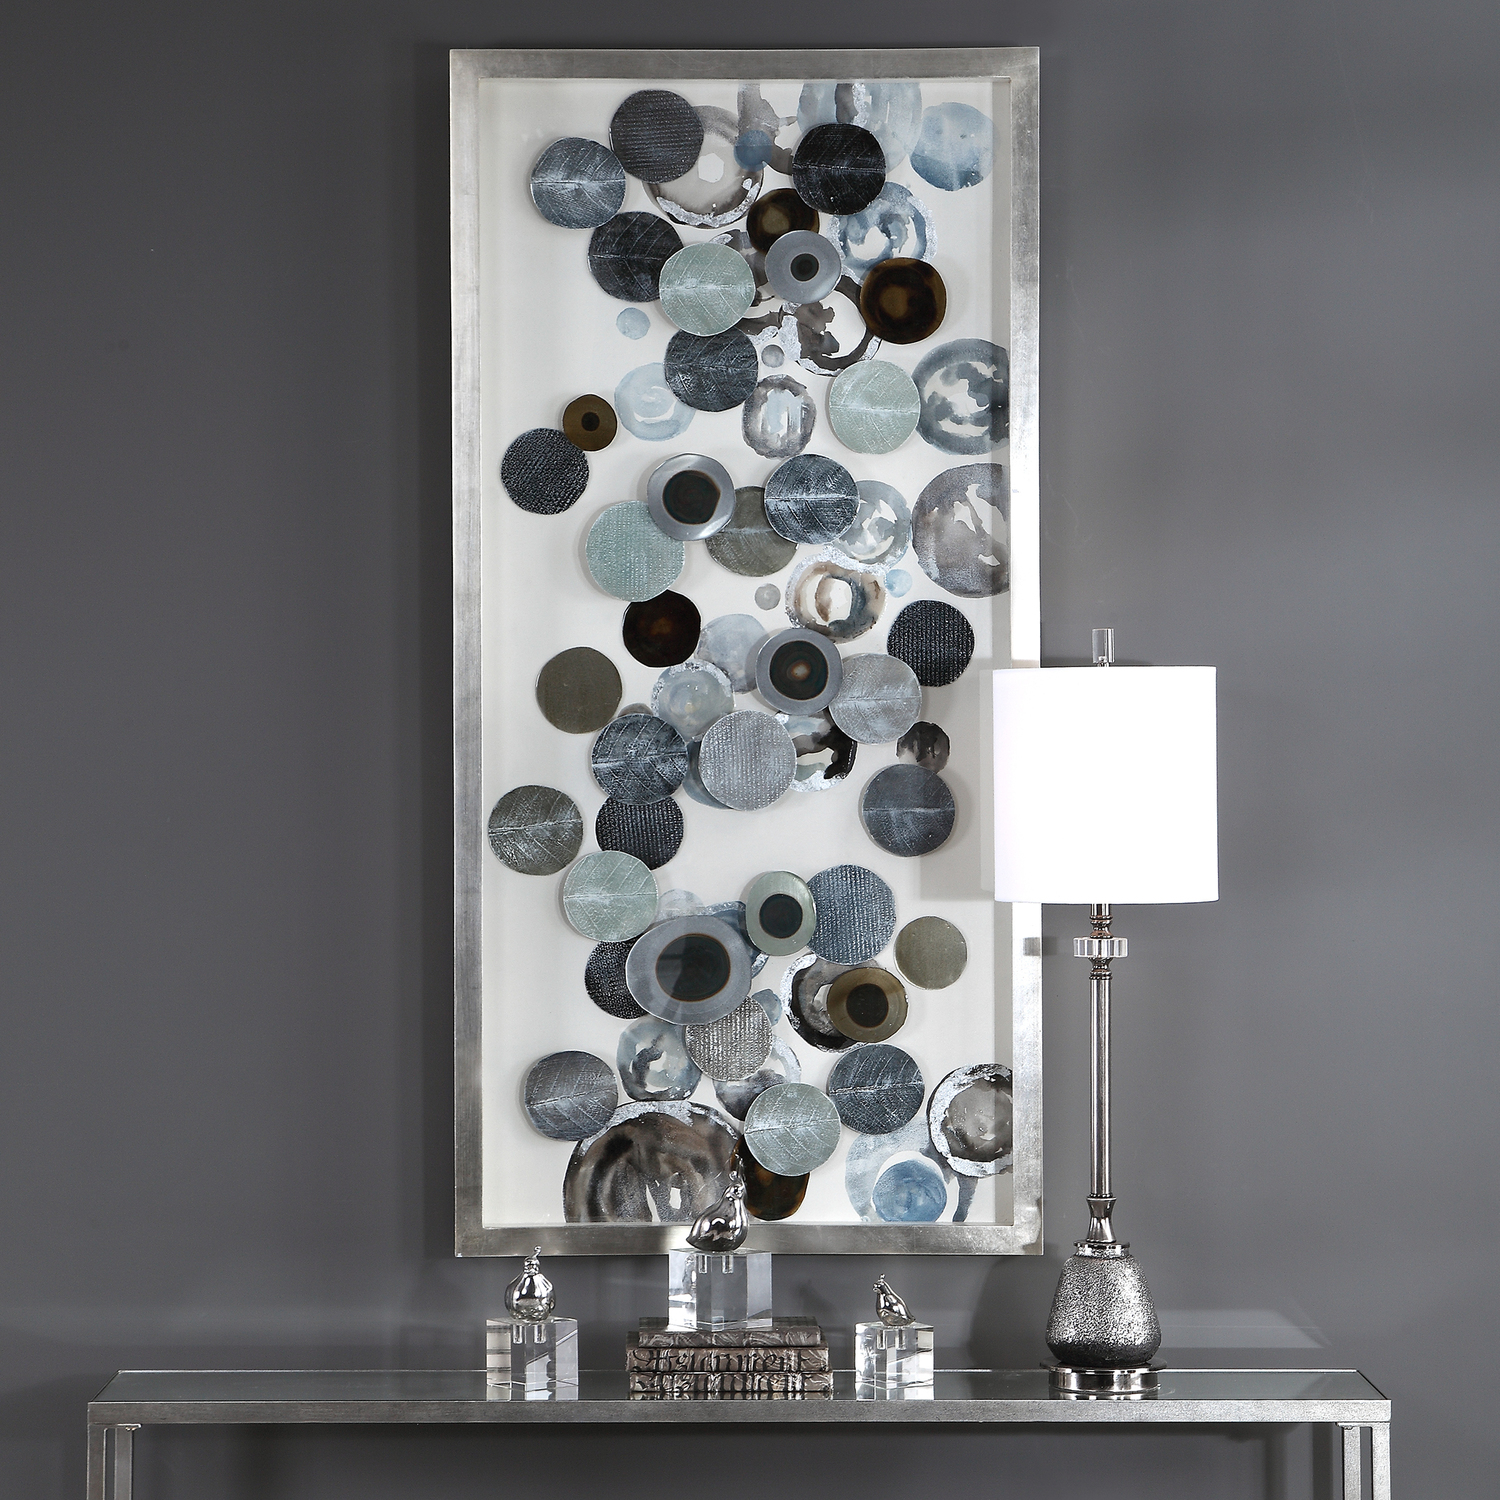 bath shower box Uttermost Shadow Box Abstract In Design, This Art Features Overlapping, Blow Torched Iron Discs With Hand Painted Acrylic Accents In Tones Of Silver, Brown, Blue, And Green. The Art Is Under Glass And Is Encased By A Lightly Antiqued Silver Leaf Shadow Box. May Be Hung Horizontal Or Vertical.